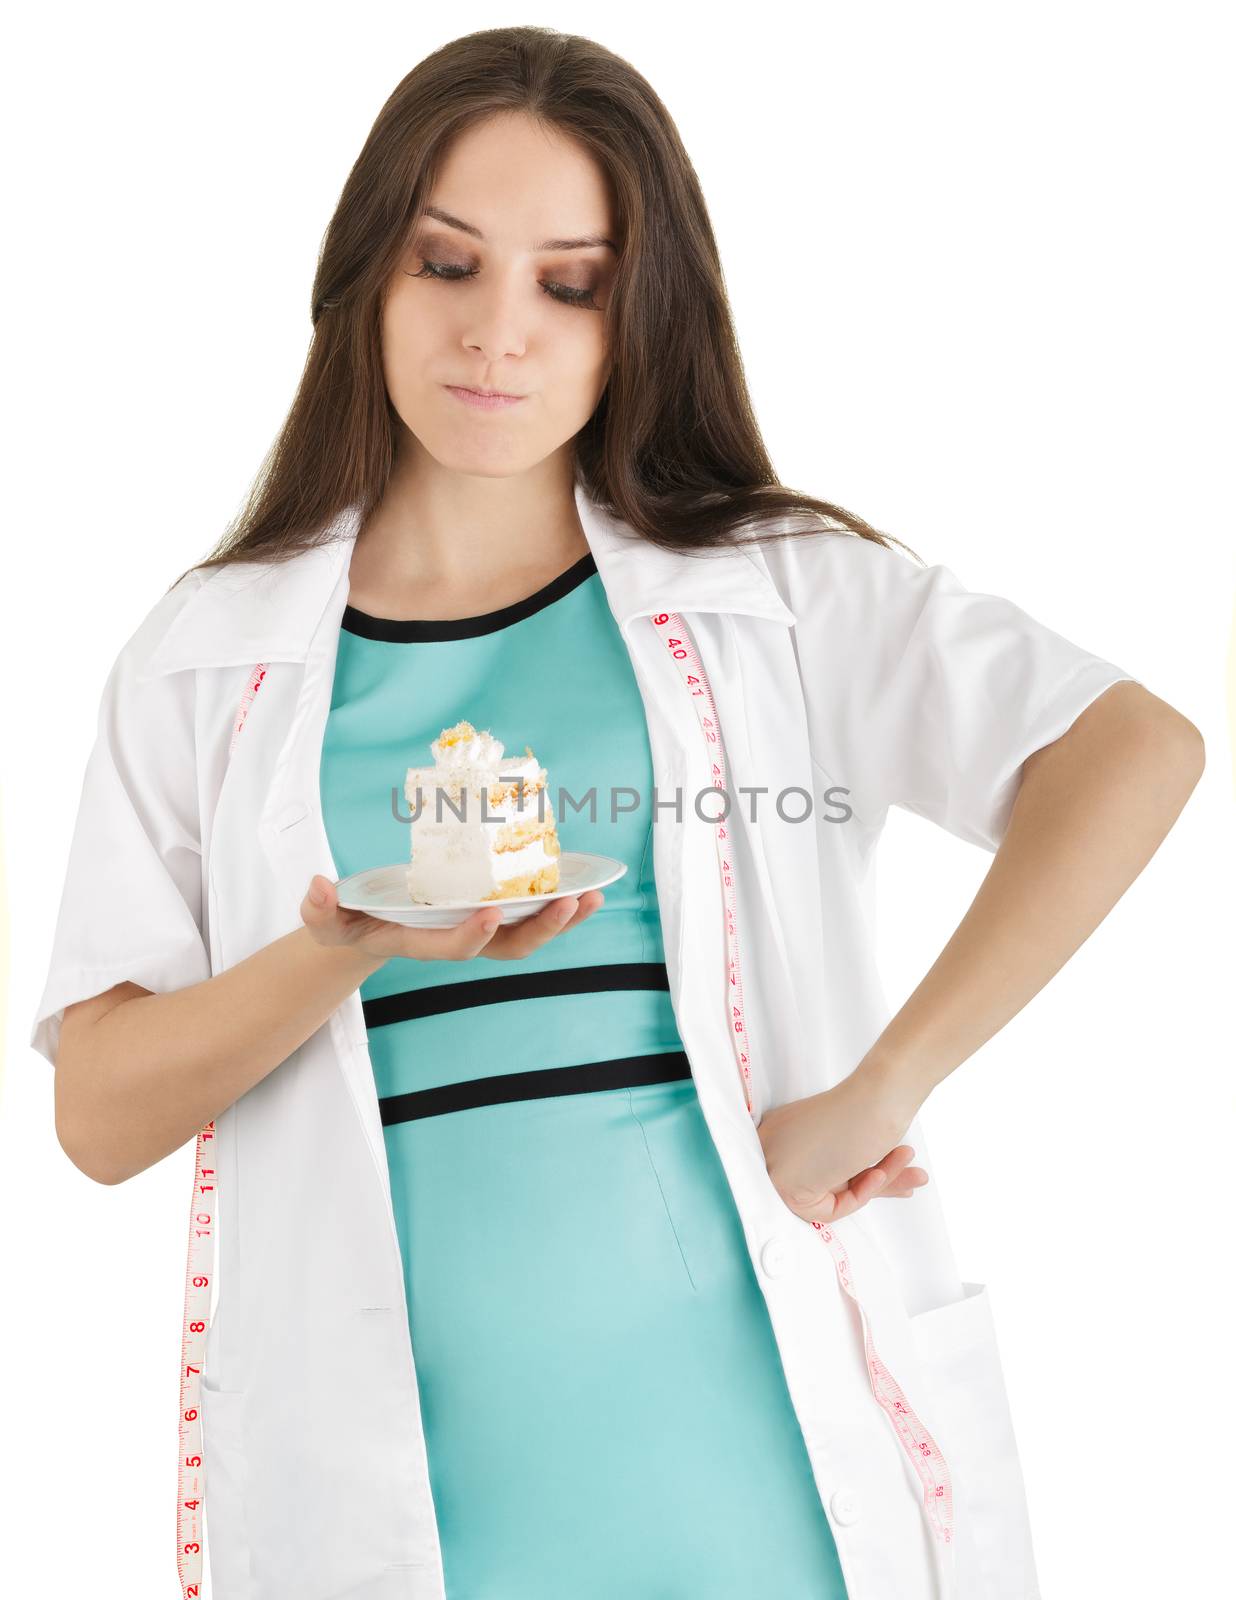 Woman nutritionist saying “no” to cake, isolated on white background.